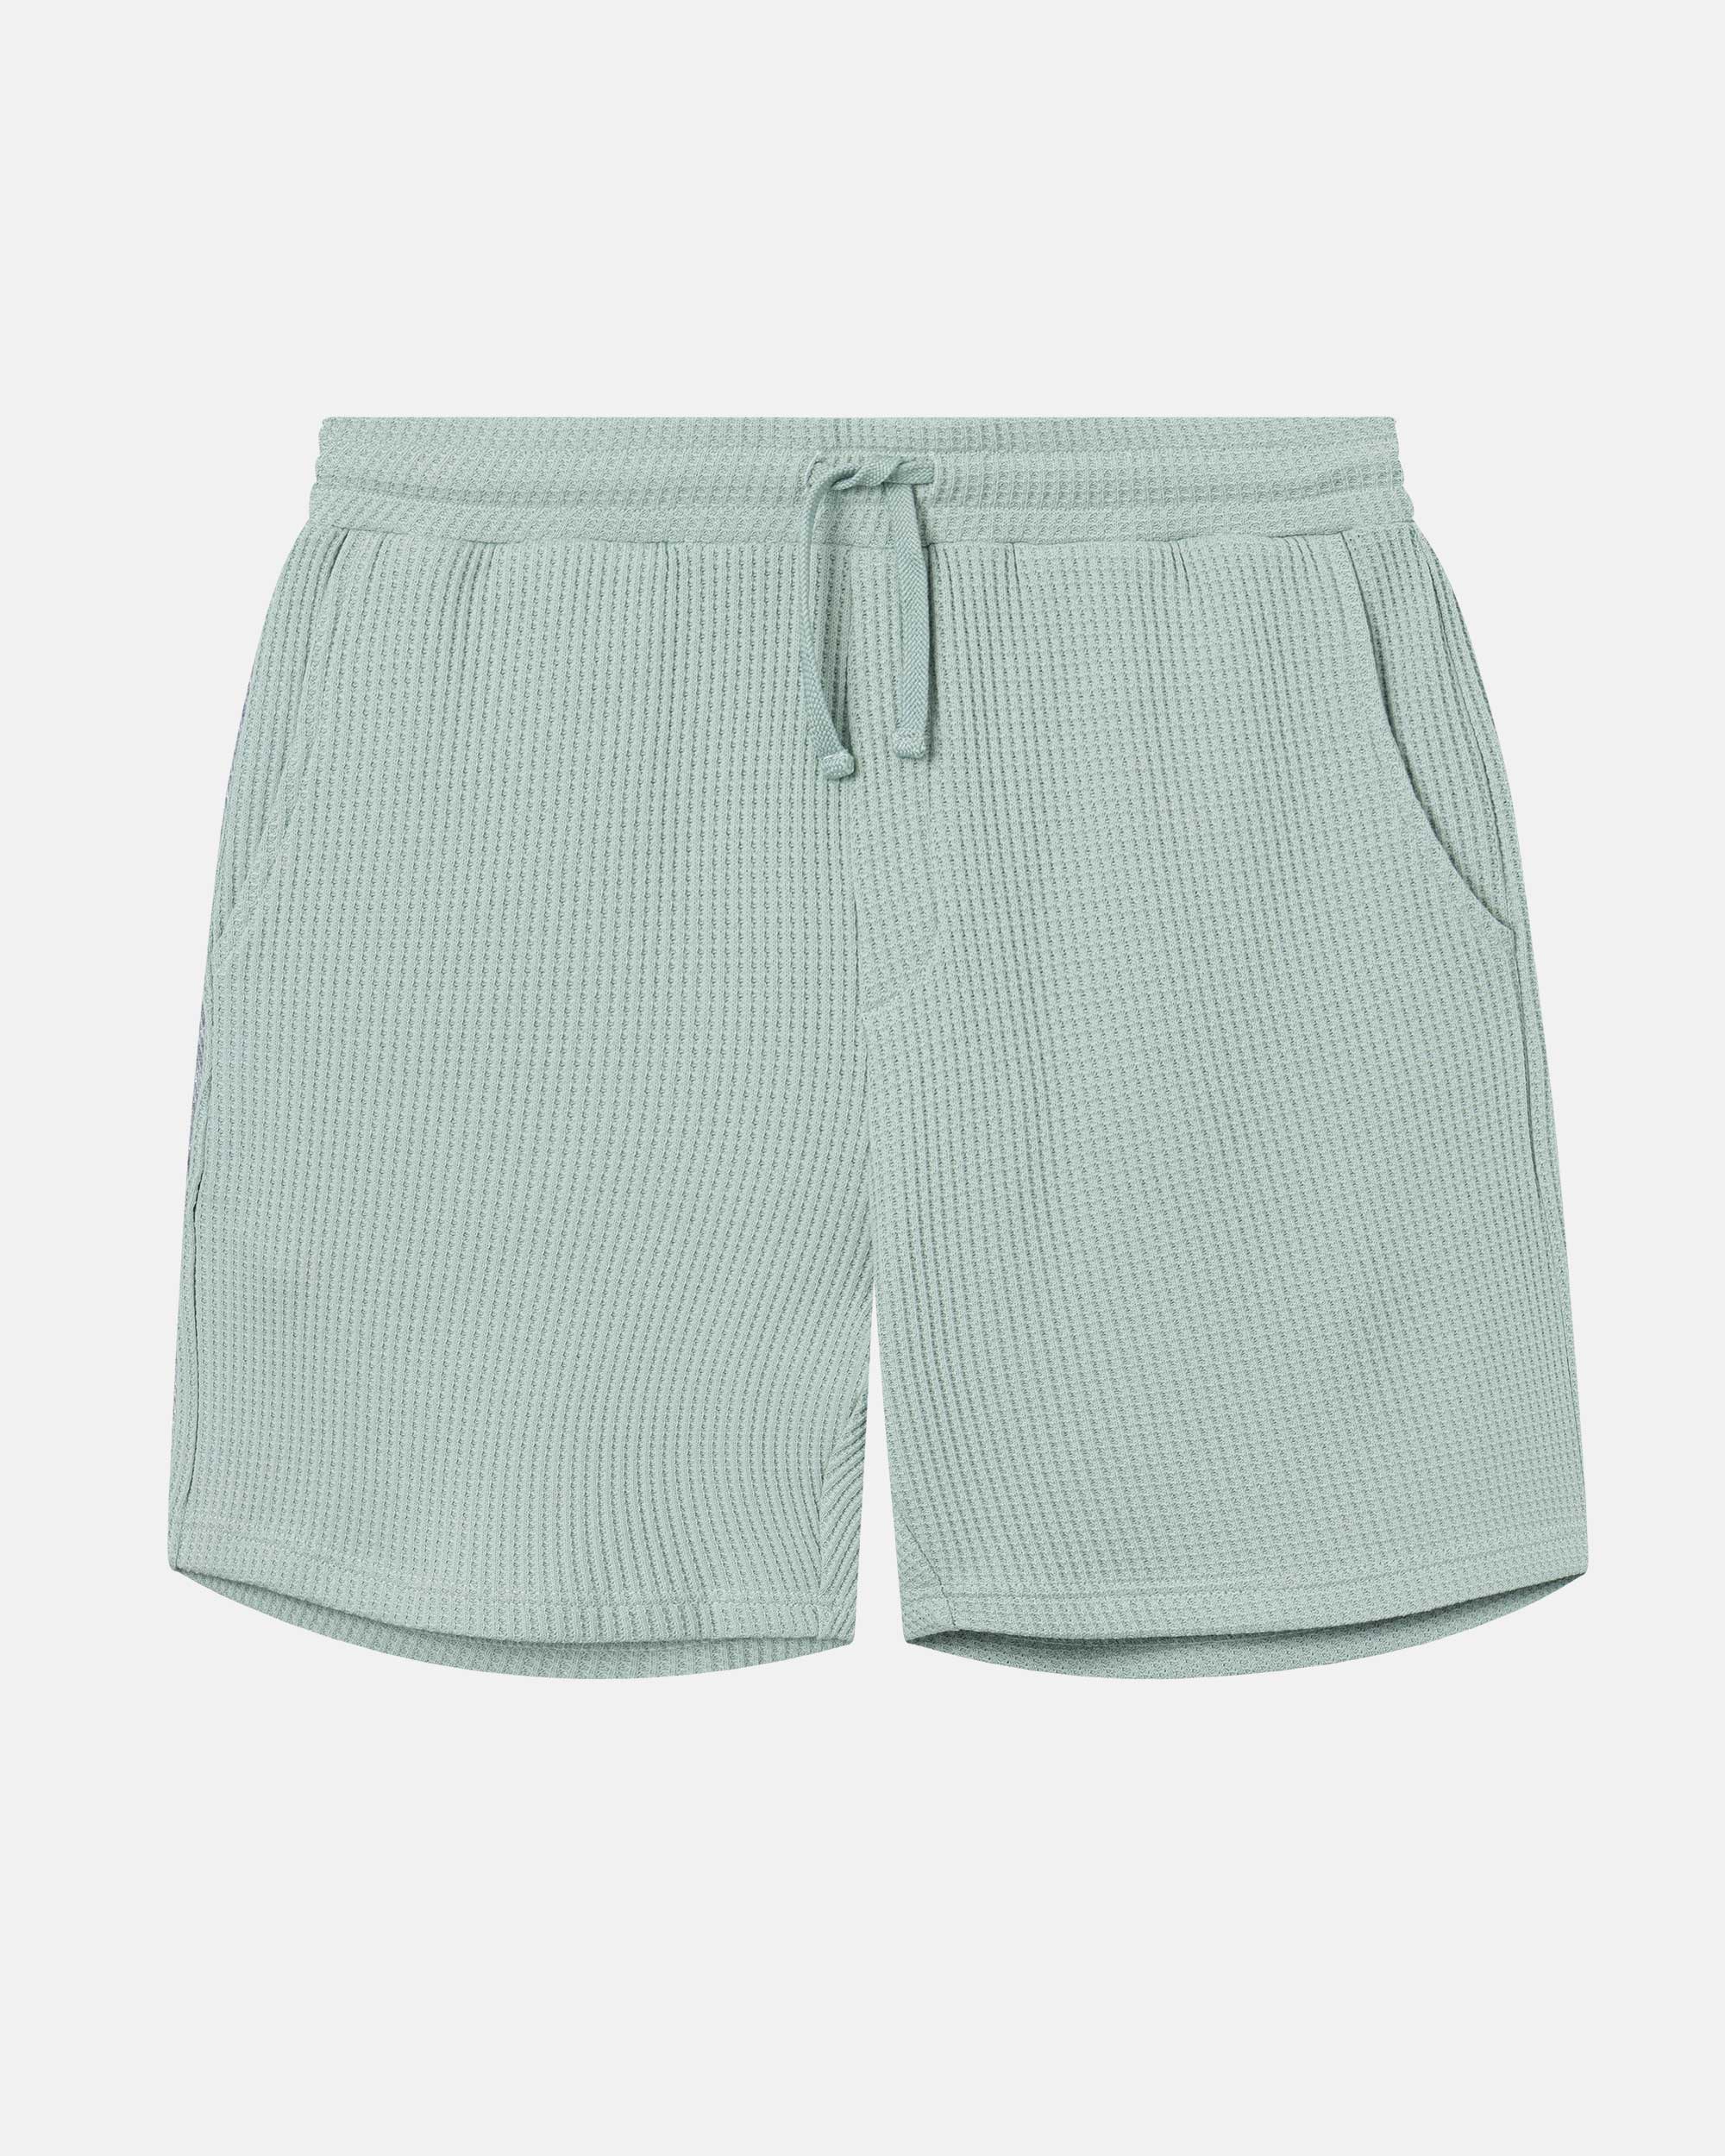 Mint green waffle-patterned mid-length shorts with two front pockets and a drawstring.